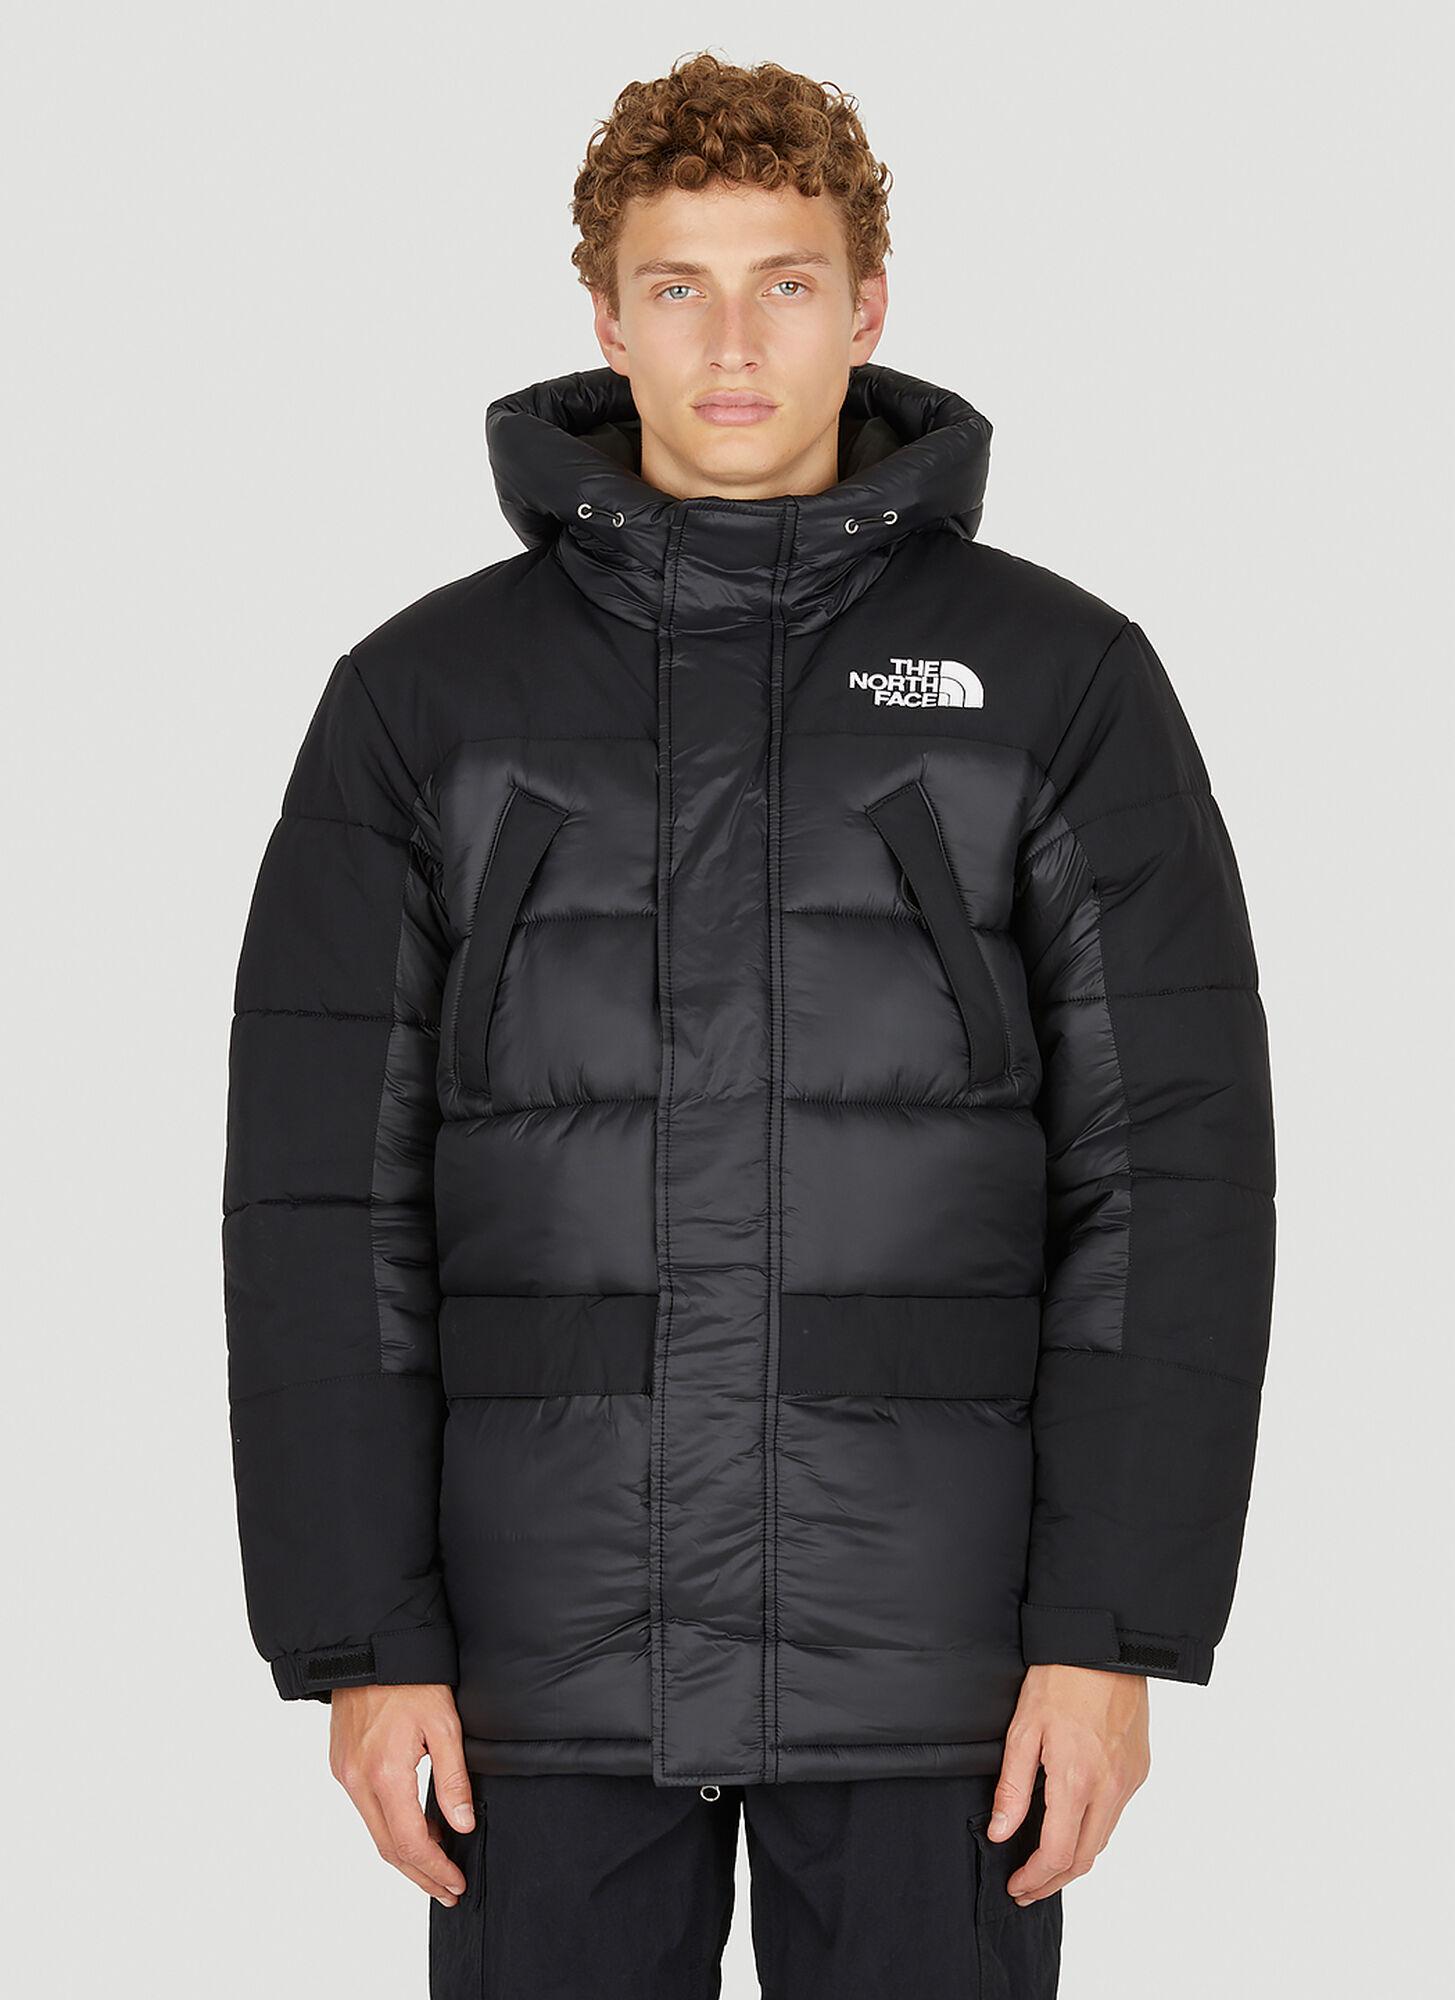 The North Face Himalayan Insulated Parka Jacket in Gray for Men | Lyst